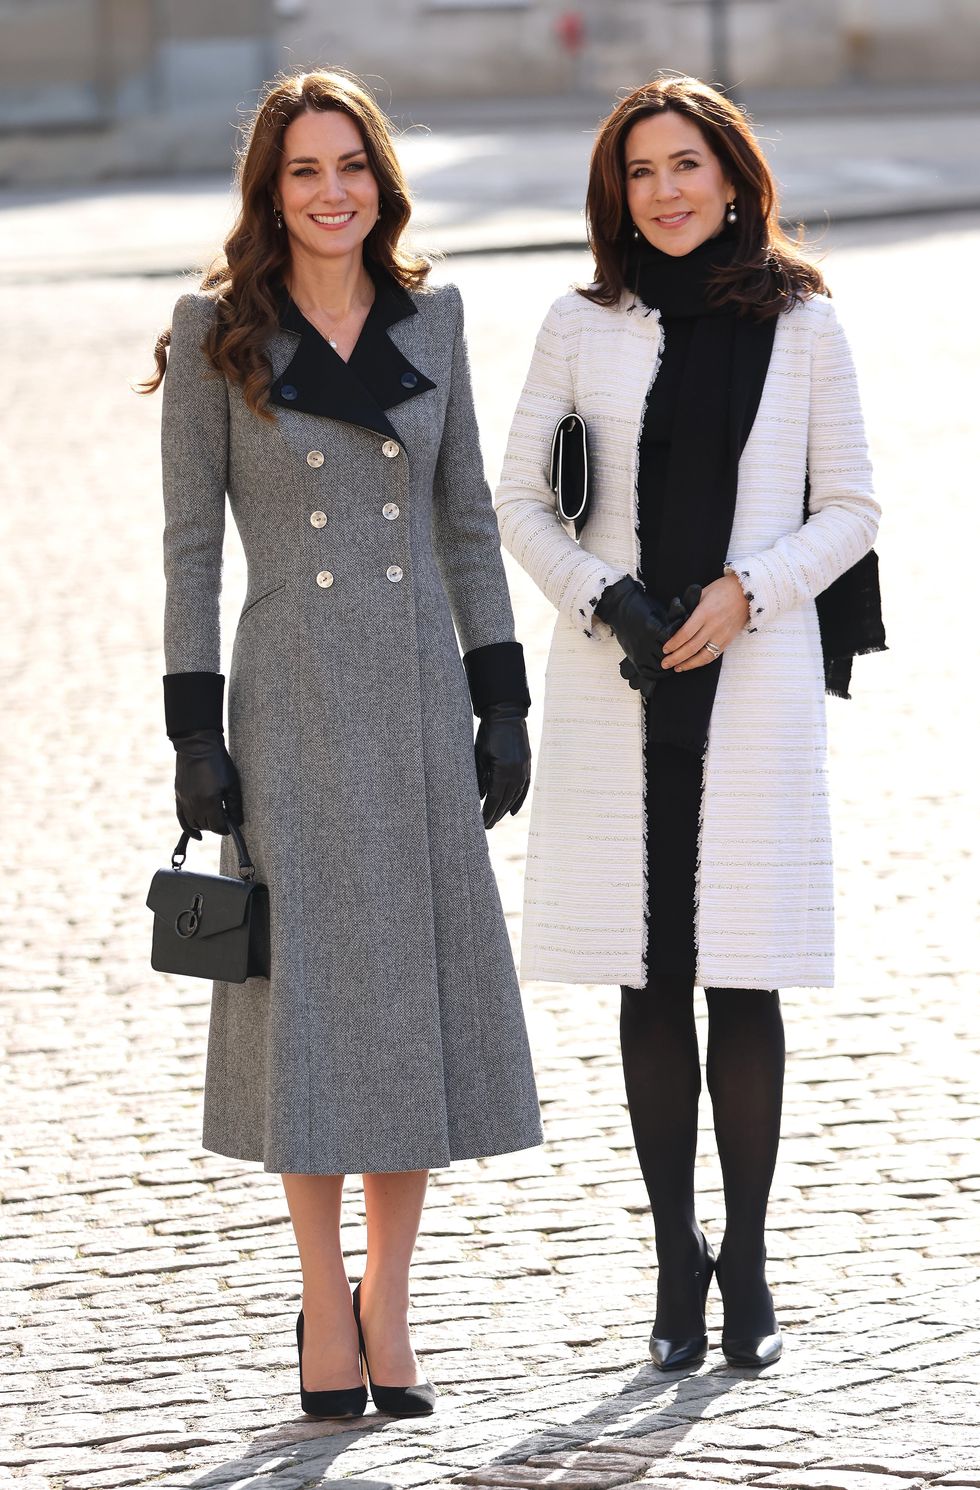 copenhagen, denmark february 23 catherine, duchess of cambridge and mary, crown princess of denmark attend christian ix's palace on february 23, 2022 in copenhagen, denmark the duchess of cambridge visits copenhagen between 22nd and 23rd february on a working visit with the royal foundation centre for early childhood photo by chris jacksongetty images